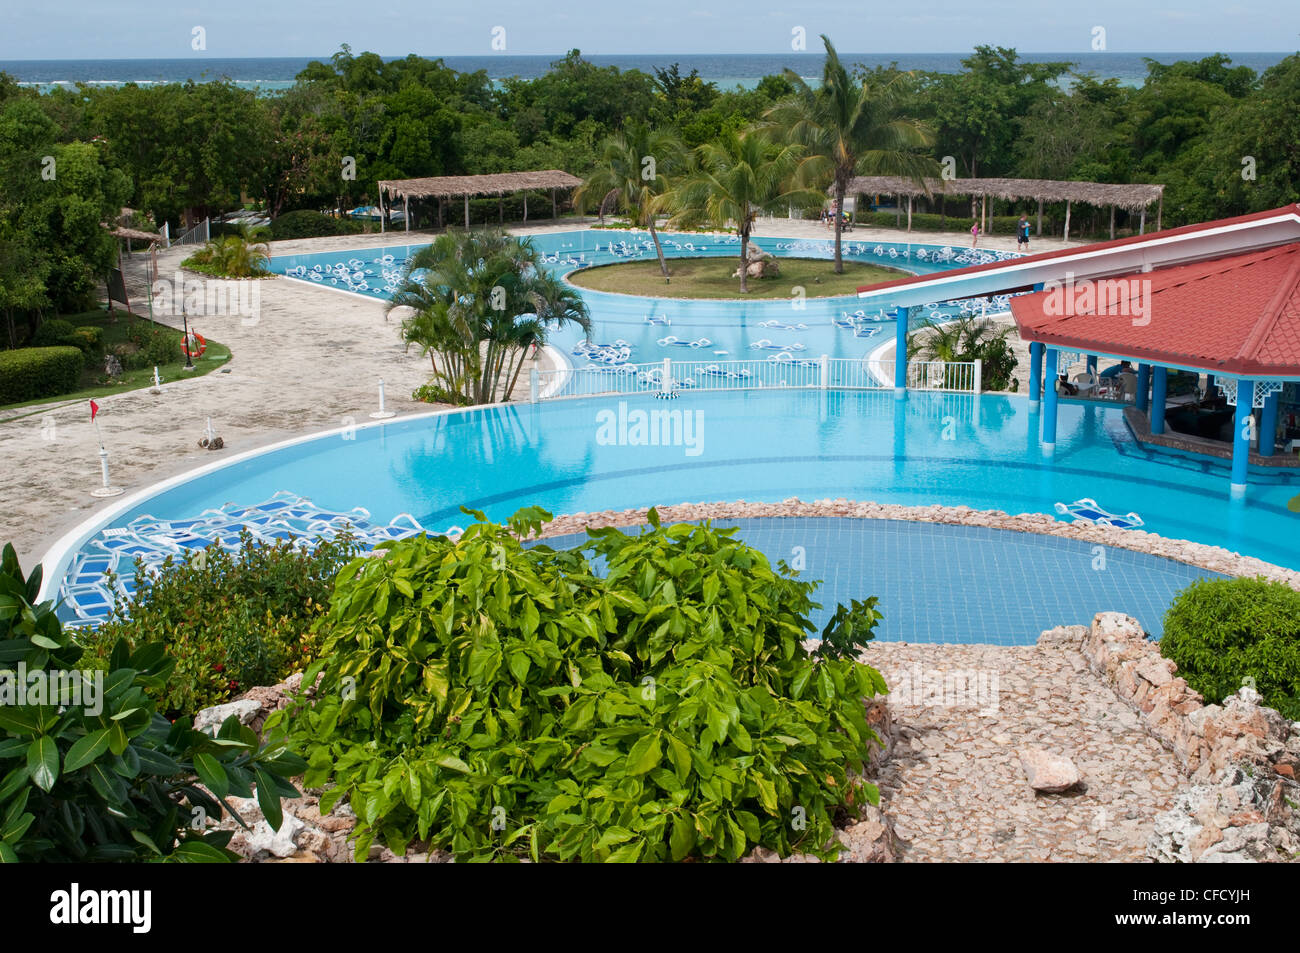 Pre hurricane preparation with lounge chairs placed in pools near Holguin, Cuba Stock Photo